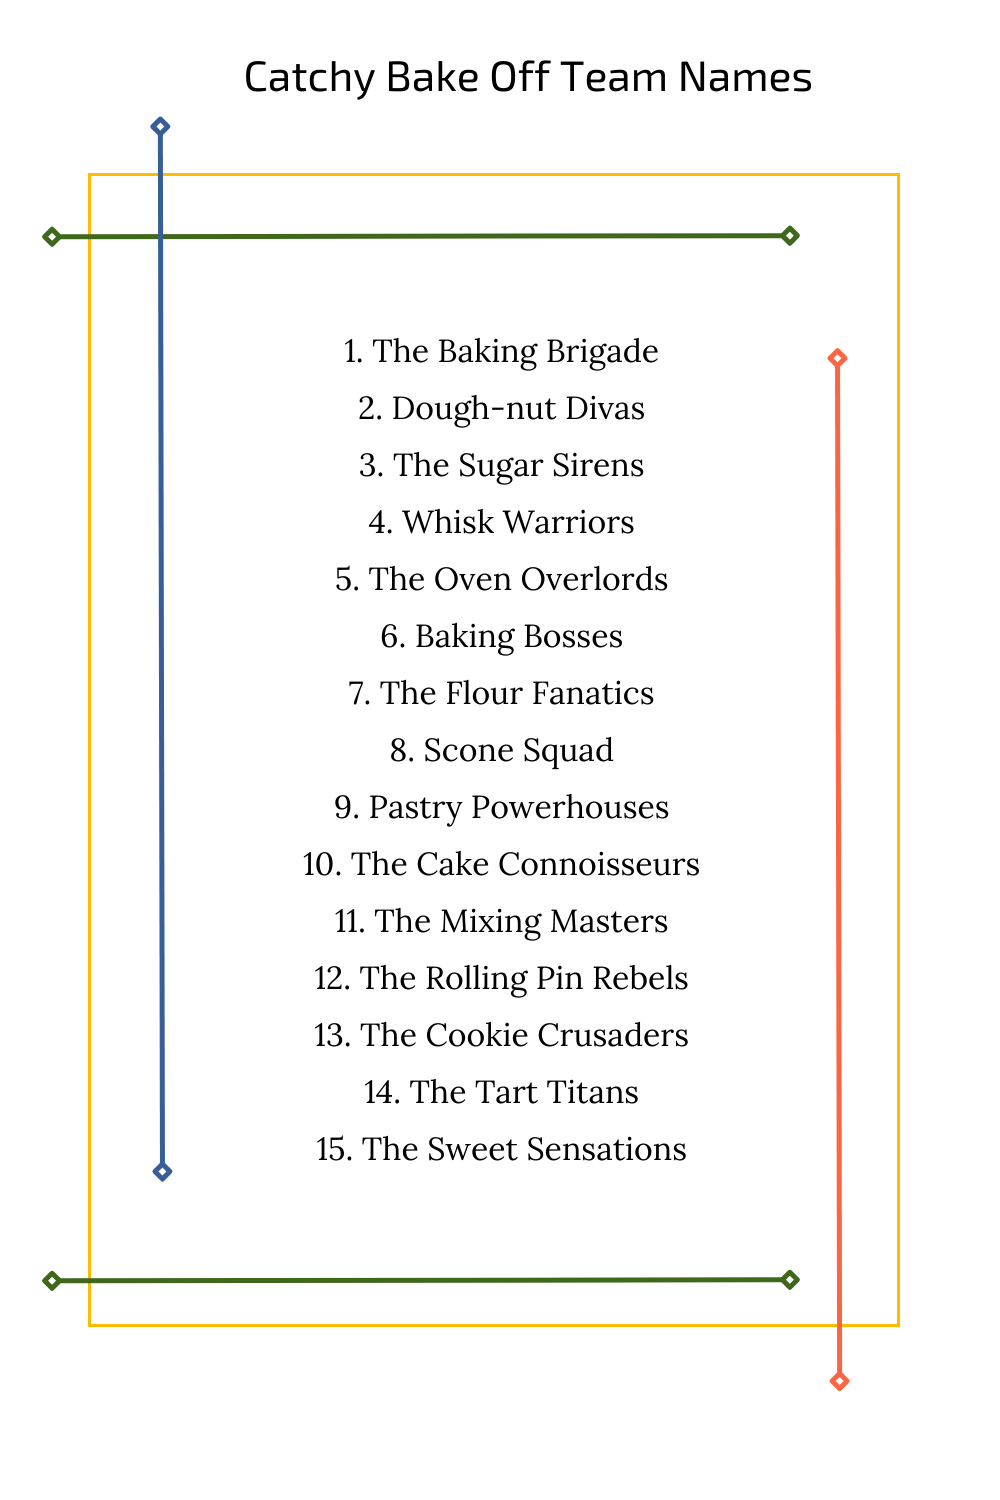 Catchy Bake Off Team Names